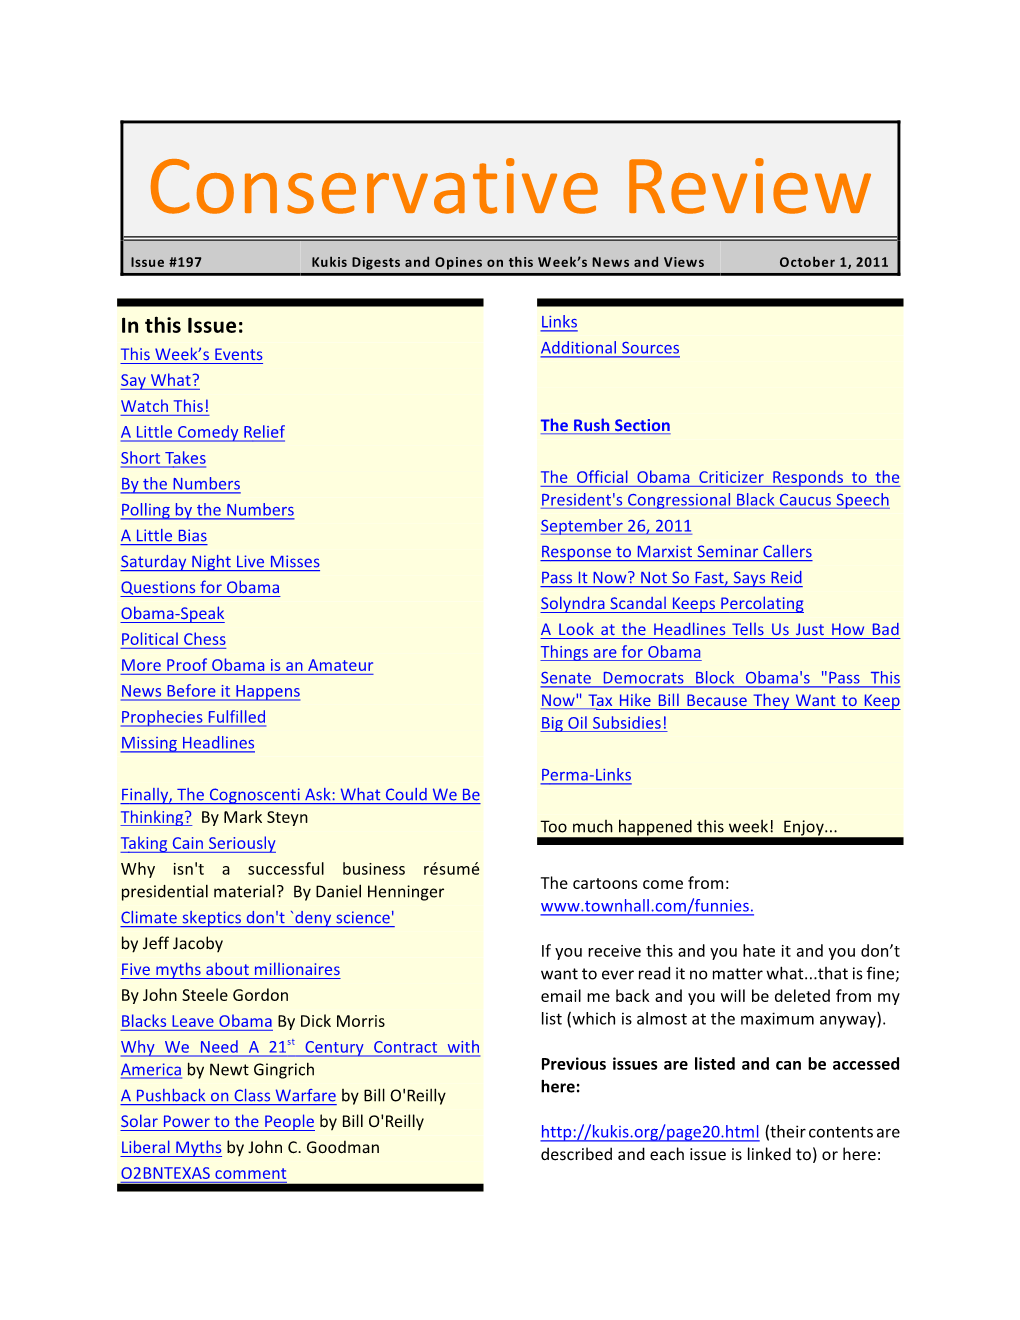 Conservative Review